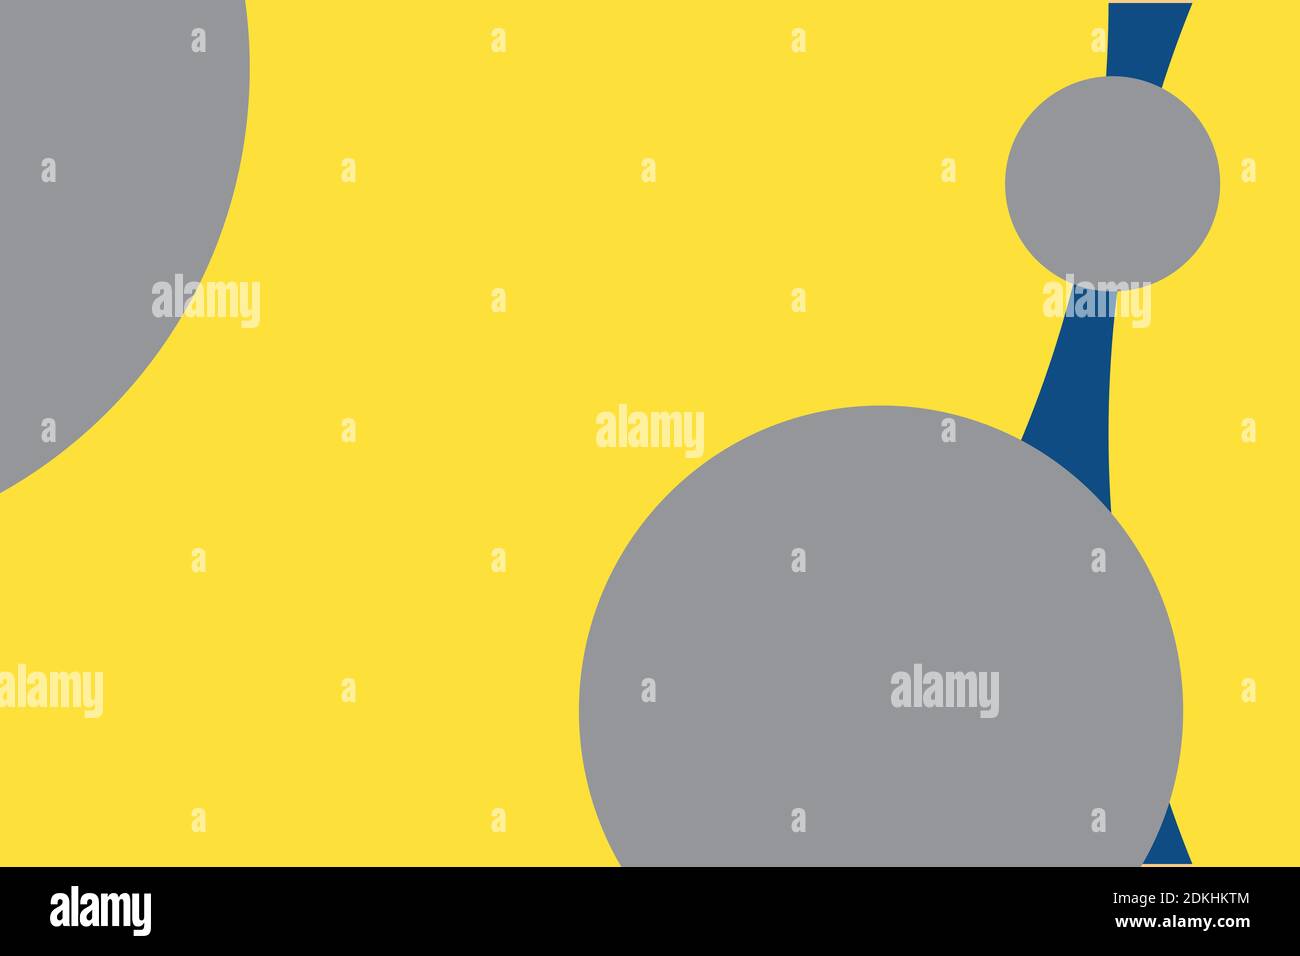 Three color abstract background of trendy colors 2021 and 2020. Yellow, grey and classic blue. Circles forms. Copy space. Stock Photo